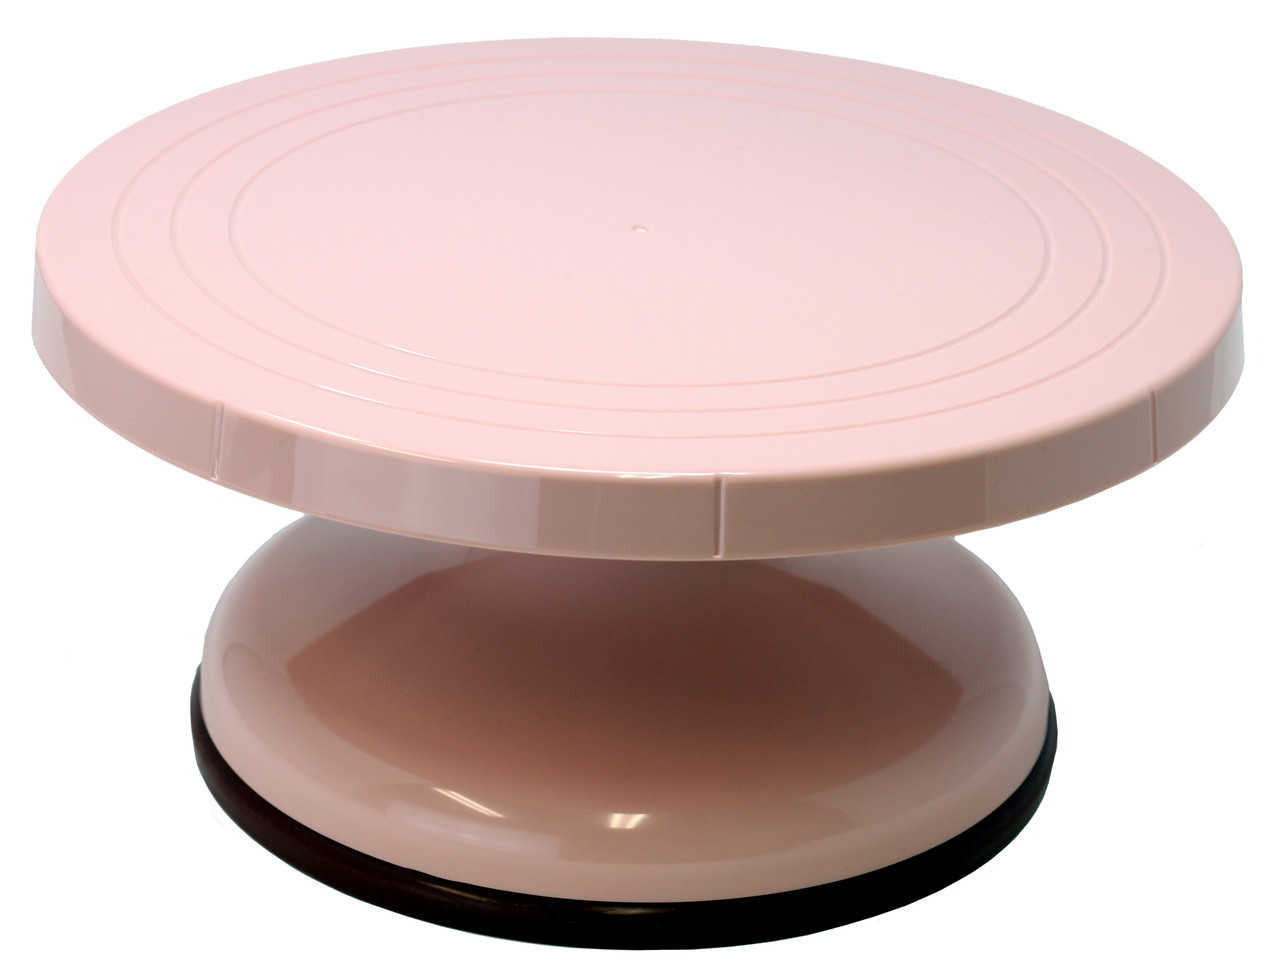 10.5 Inch Rotating Cake Decorating Turntable - Pink Plastic - Revolving  Cake Stand, Banding Wheel, Sculpture Stand with Sturdy Base …